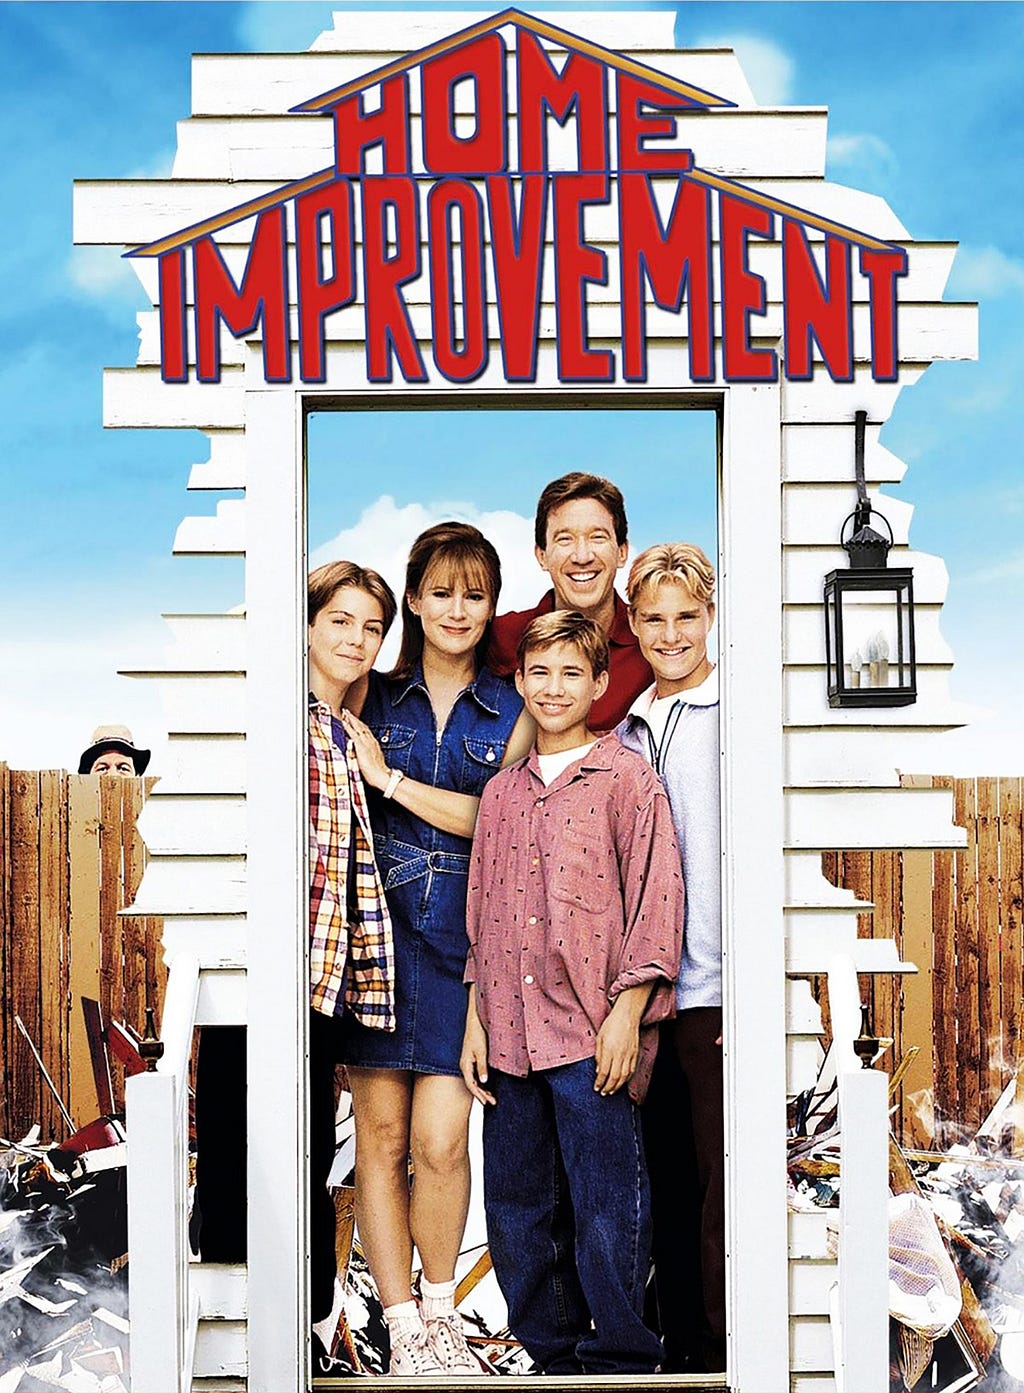 Home improvement TV show poster. All of the characters are in a doorway juxtaposed in front of the family fence.